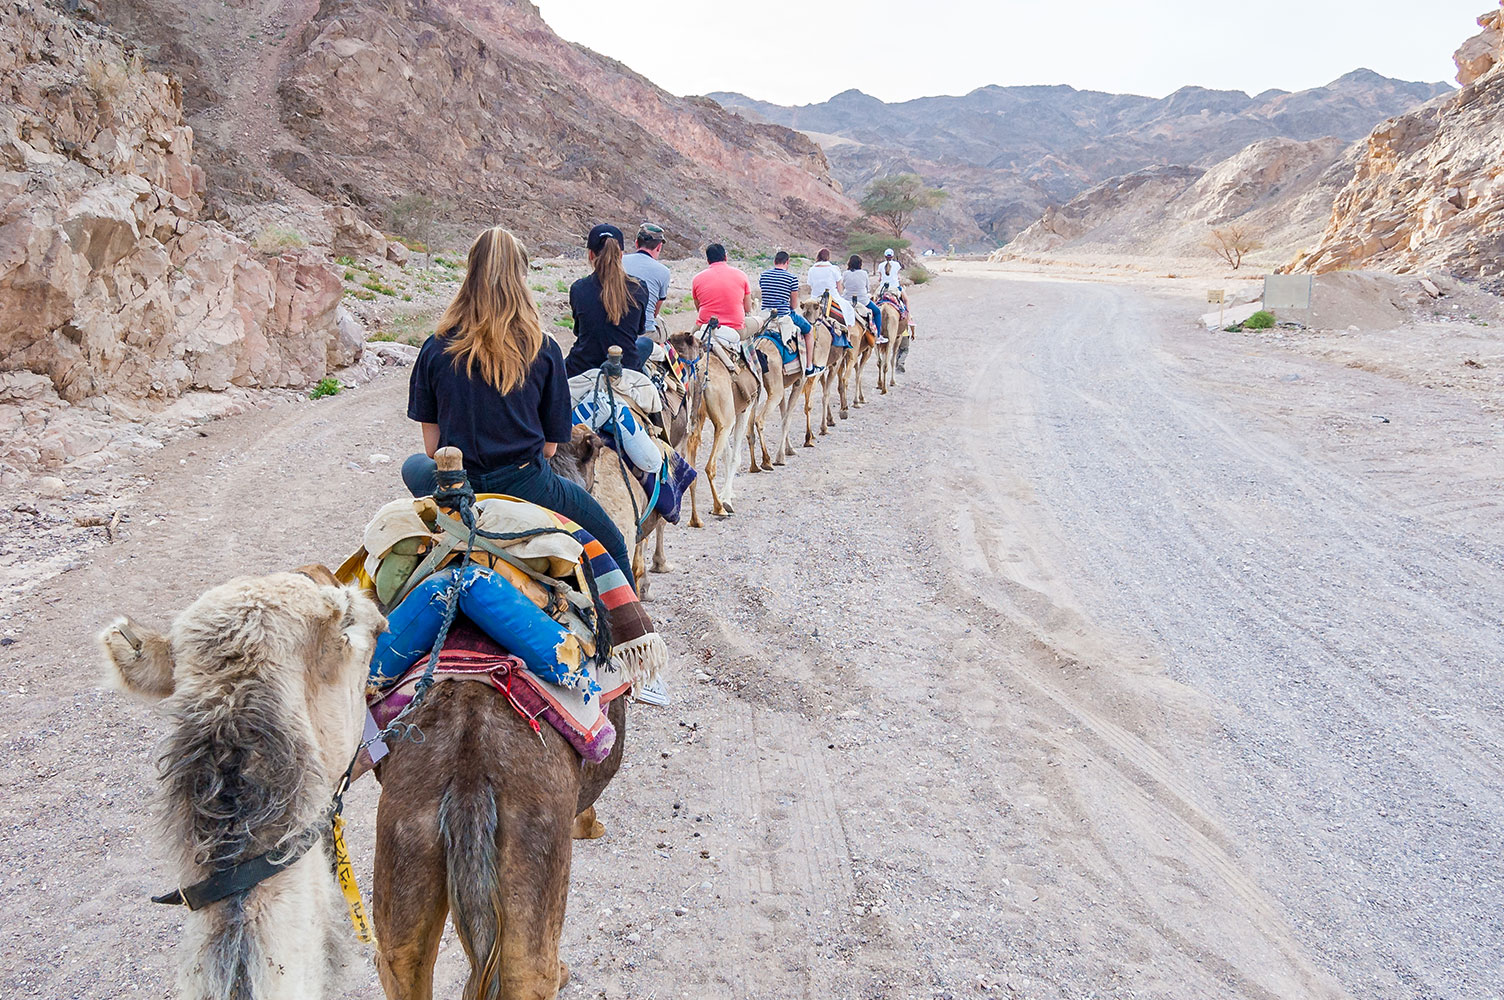 group of people riding camels